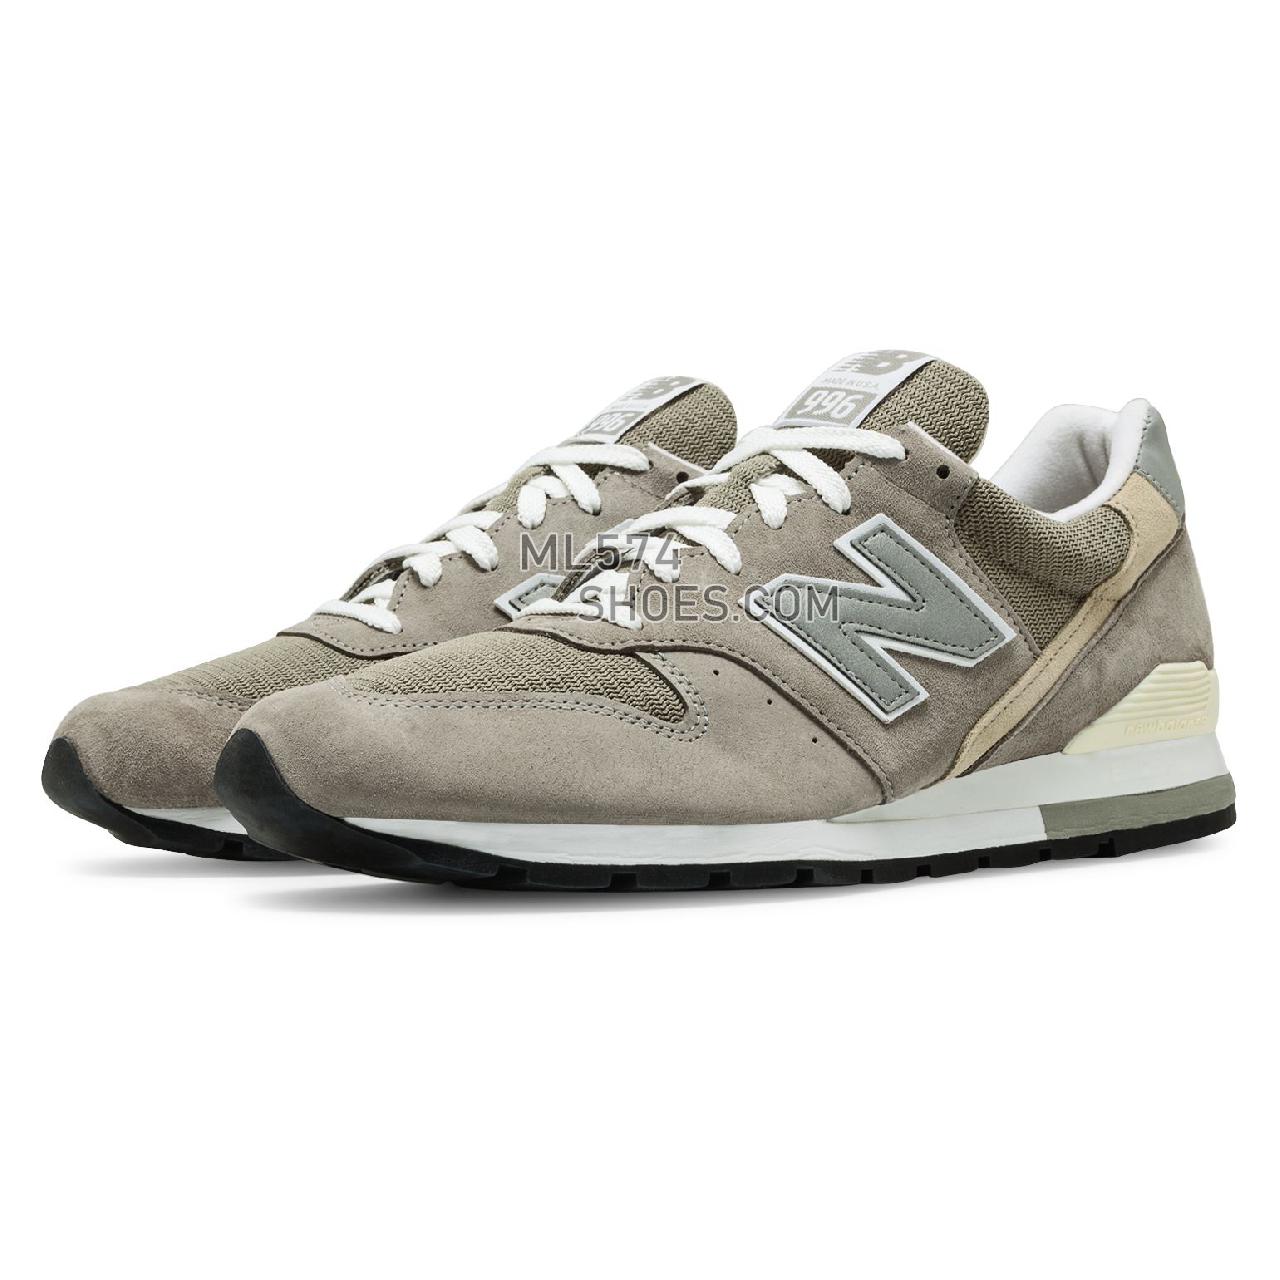 New Balance 996 Made in the USA Bringback - Men's 996 - Classic Grey with White - M996